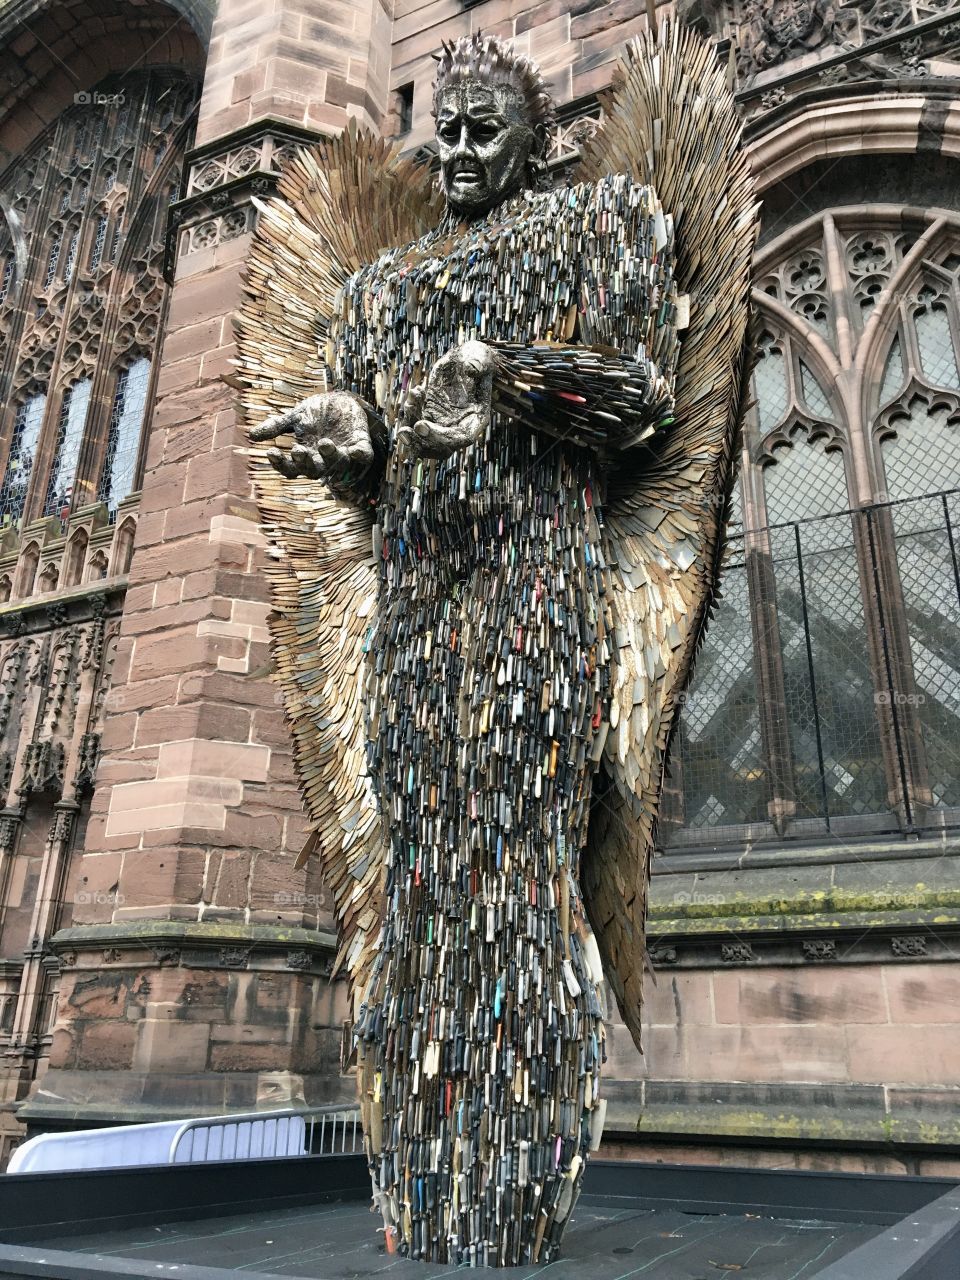 Knife Angel ... Angel Sculpture made using knives from a knife amnisty to honour the lost lives of so many 👼🏻